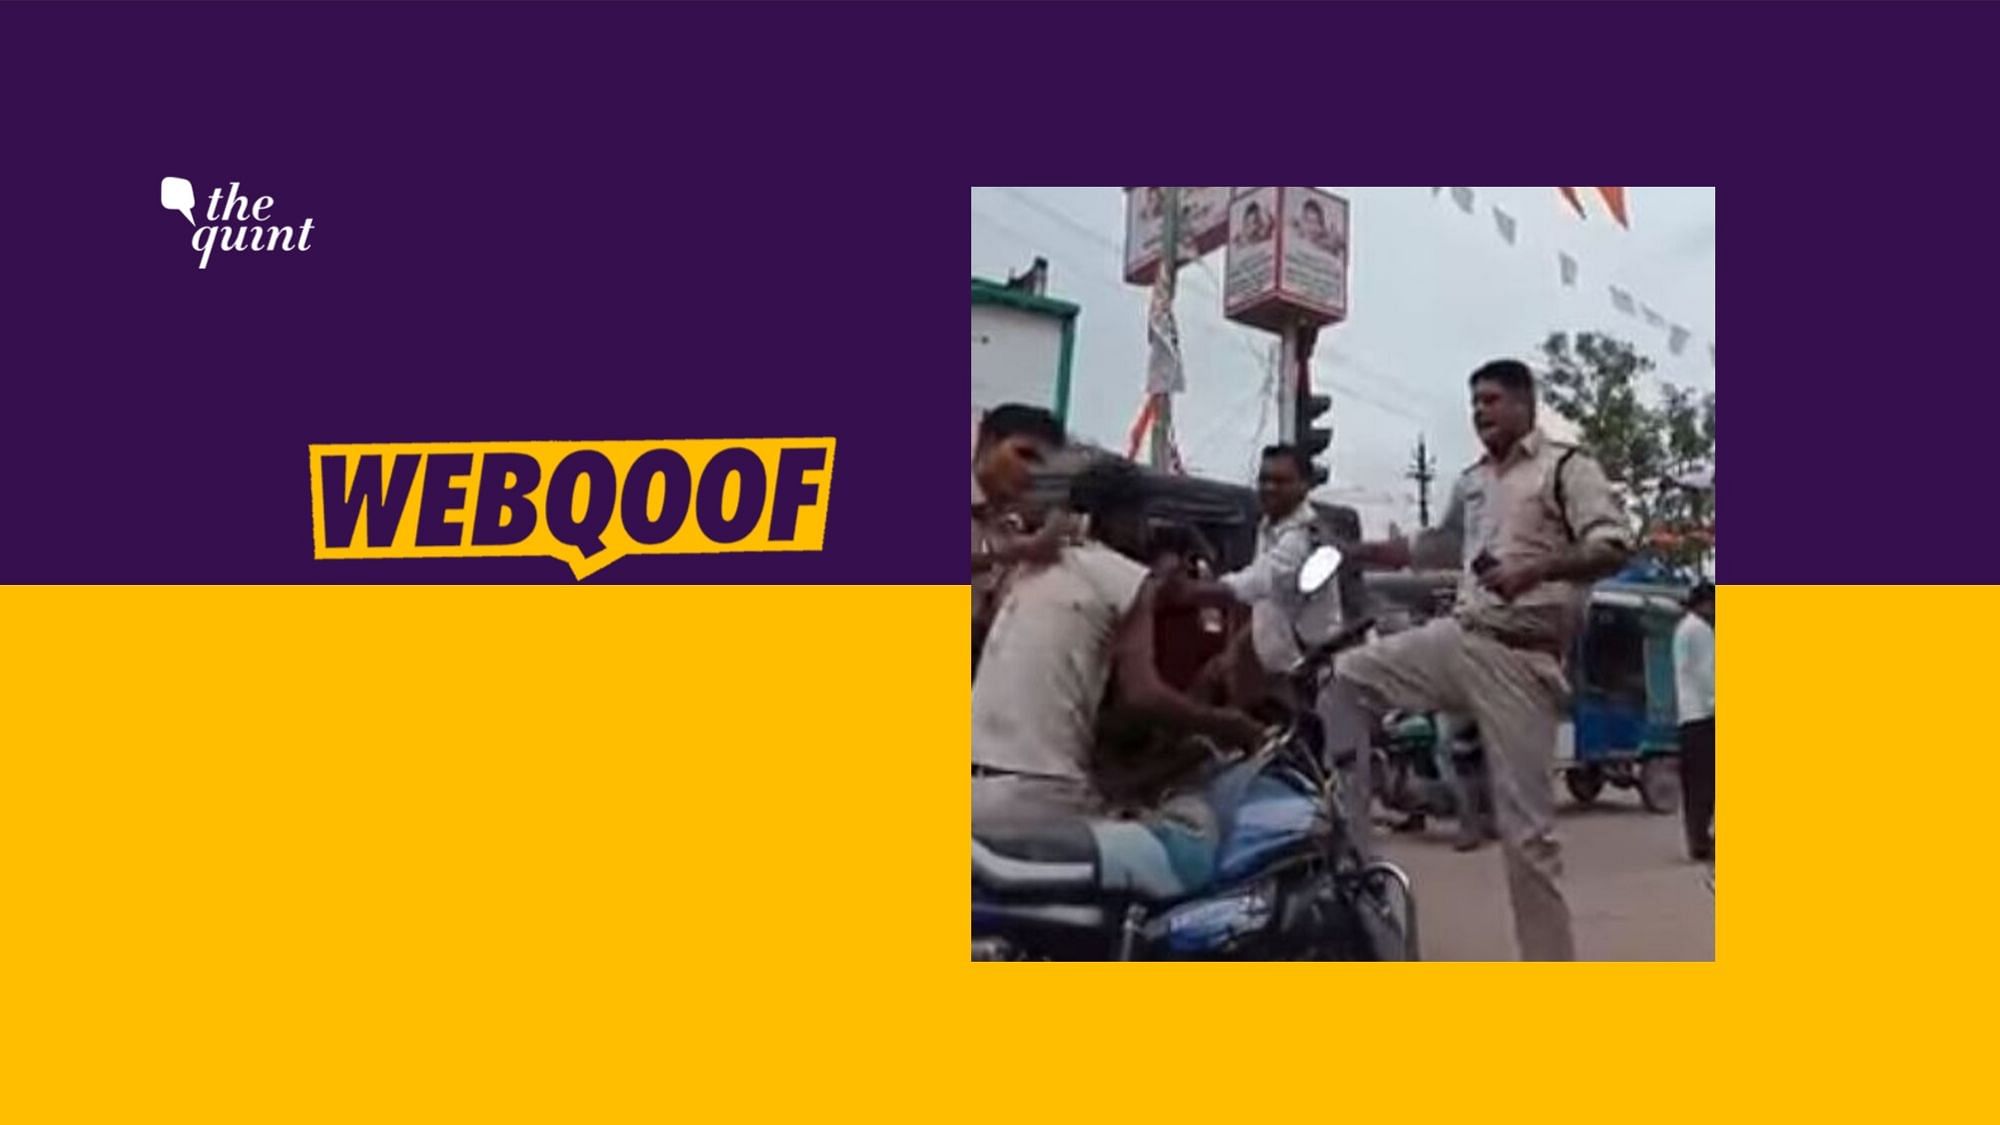 In a viral video from Chhattisgarh’s Mungeli, police personnel are seen thrashing a man.